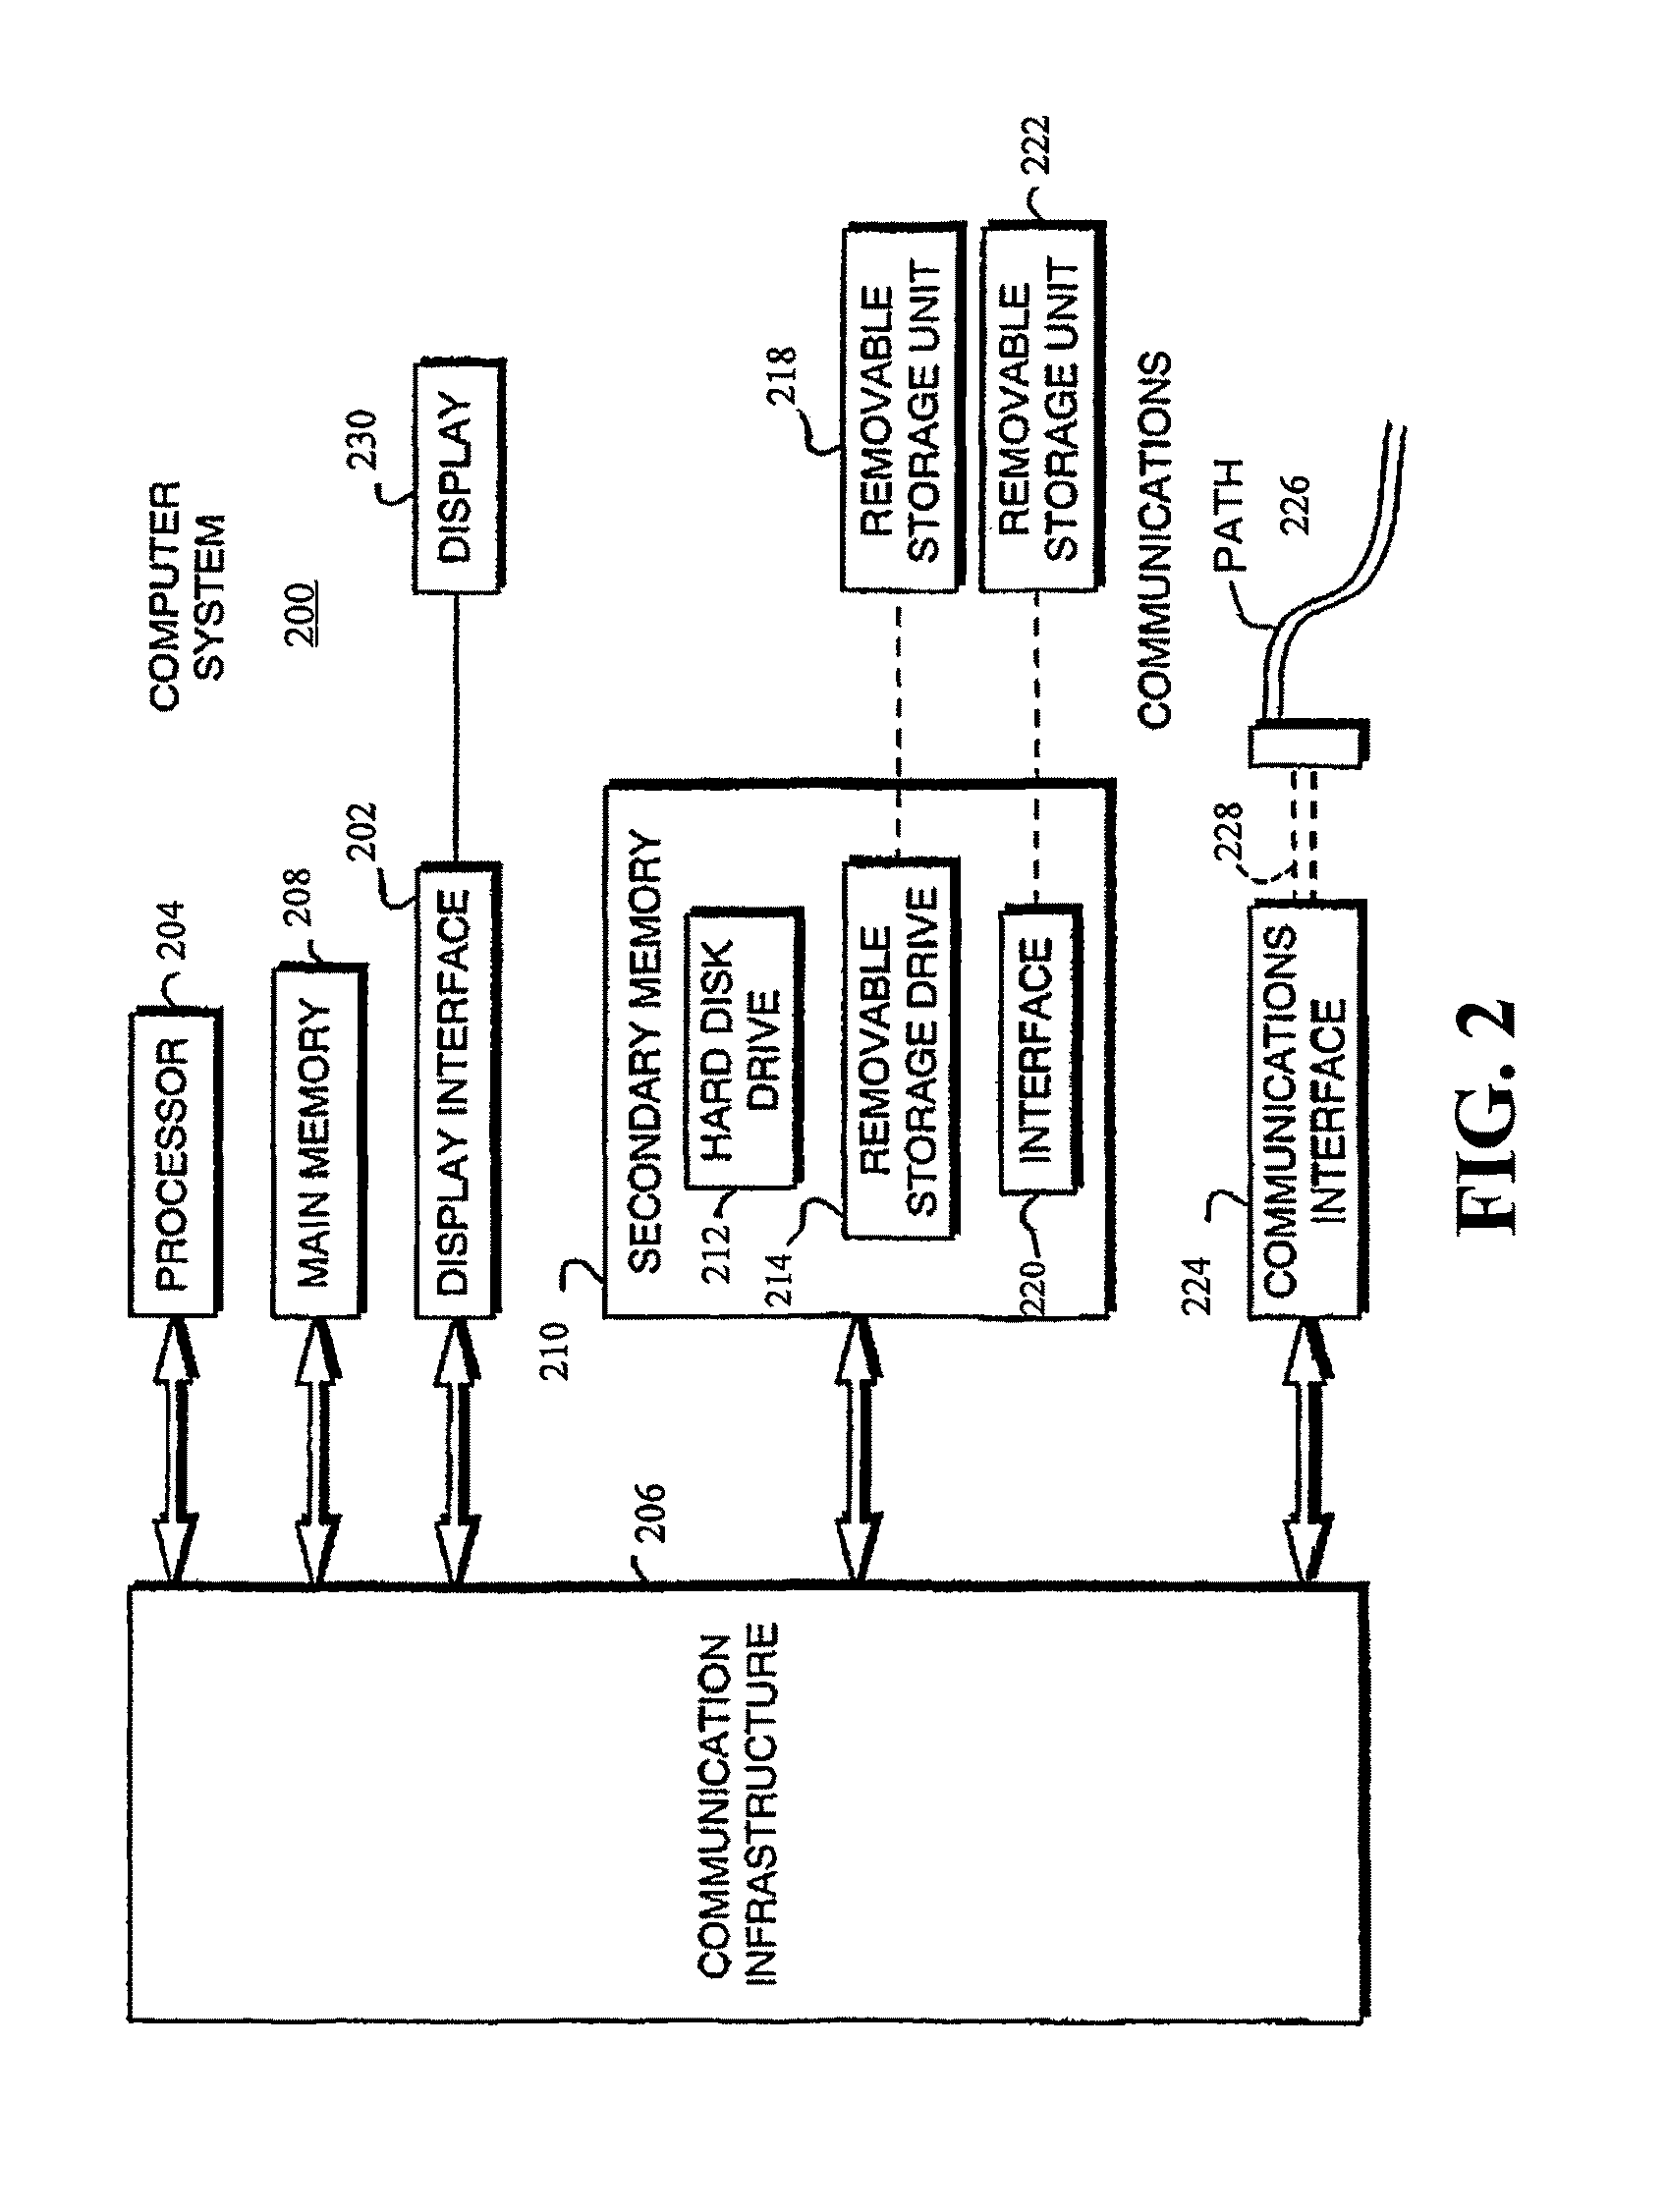 Method, apparatus, and computer program product for stochastic psycho-physiological assessment of attentional impairments